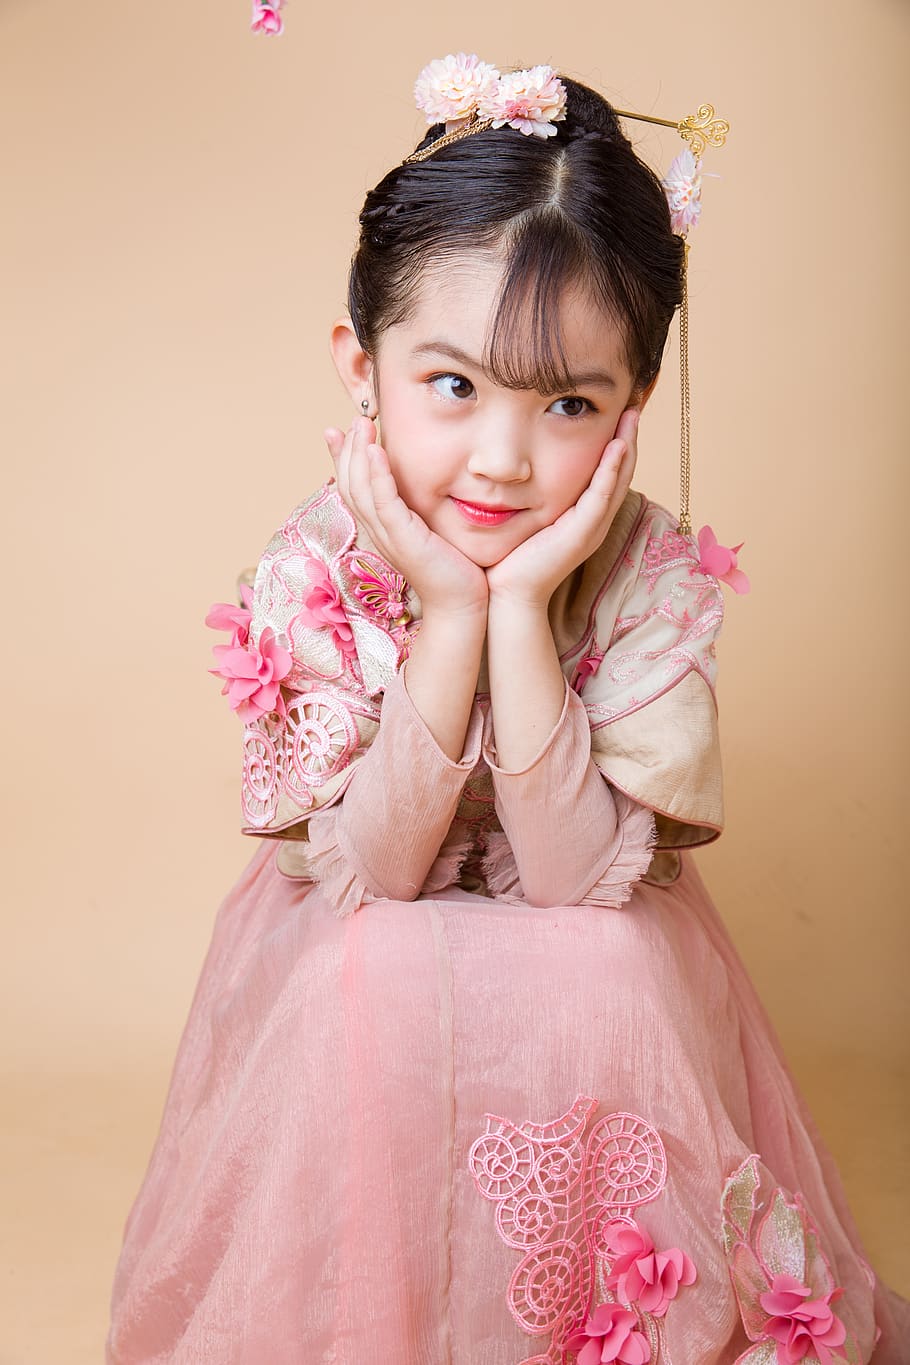 the little girl, cute, lively, naive, girls, antiquity, ancient costume, playful, childhood, child